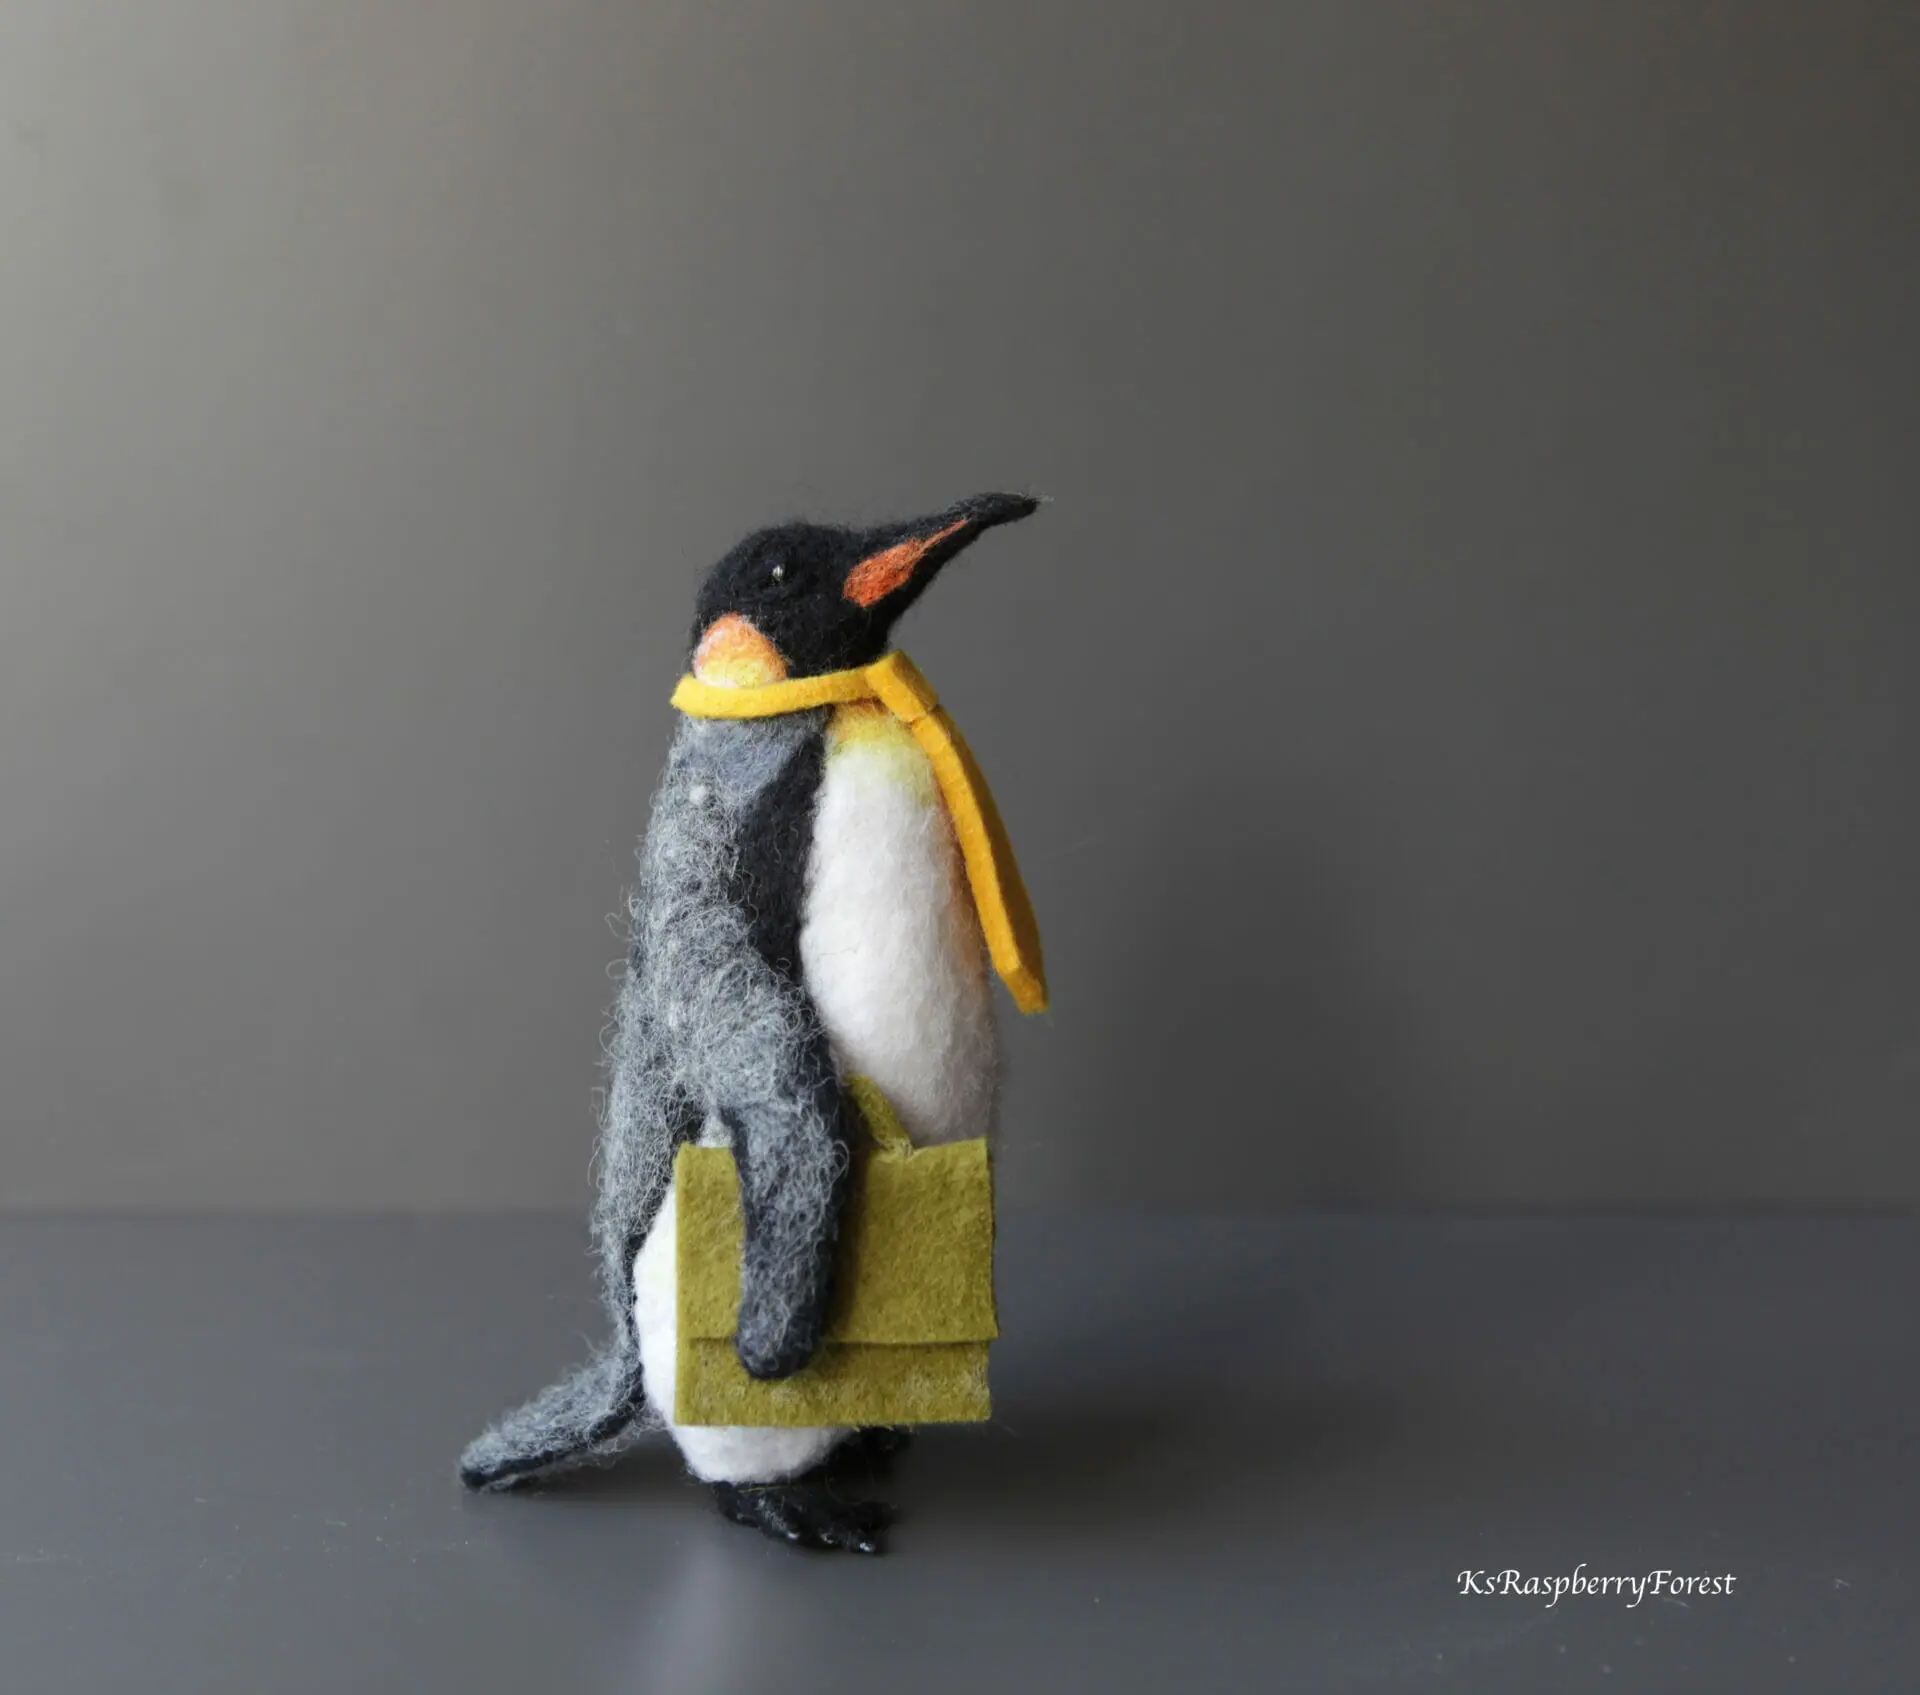 Penguin Magnetic Needle Holder – The Bee's Knees British Imports